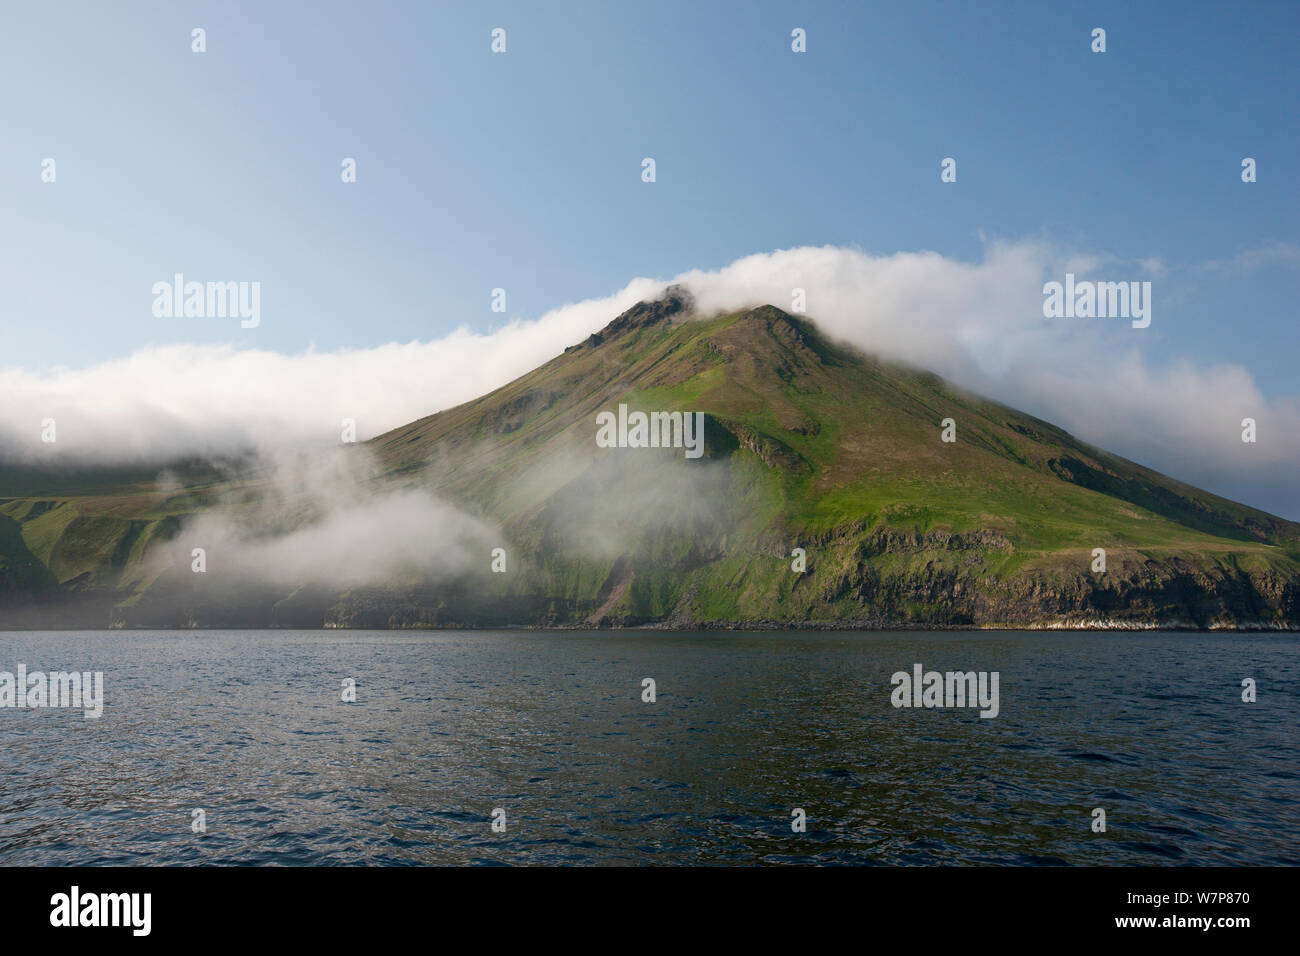 View of active volcano at Chirpoy Island, Kurils, Russian Far East. Chirpoy (meaning small bird) is the collective name usually given to the twin volcanic islands of Chirpoy and Brat Chirpoev (Russian for Chirpoy's Brother) June 2012 Stock Photo